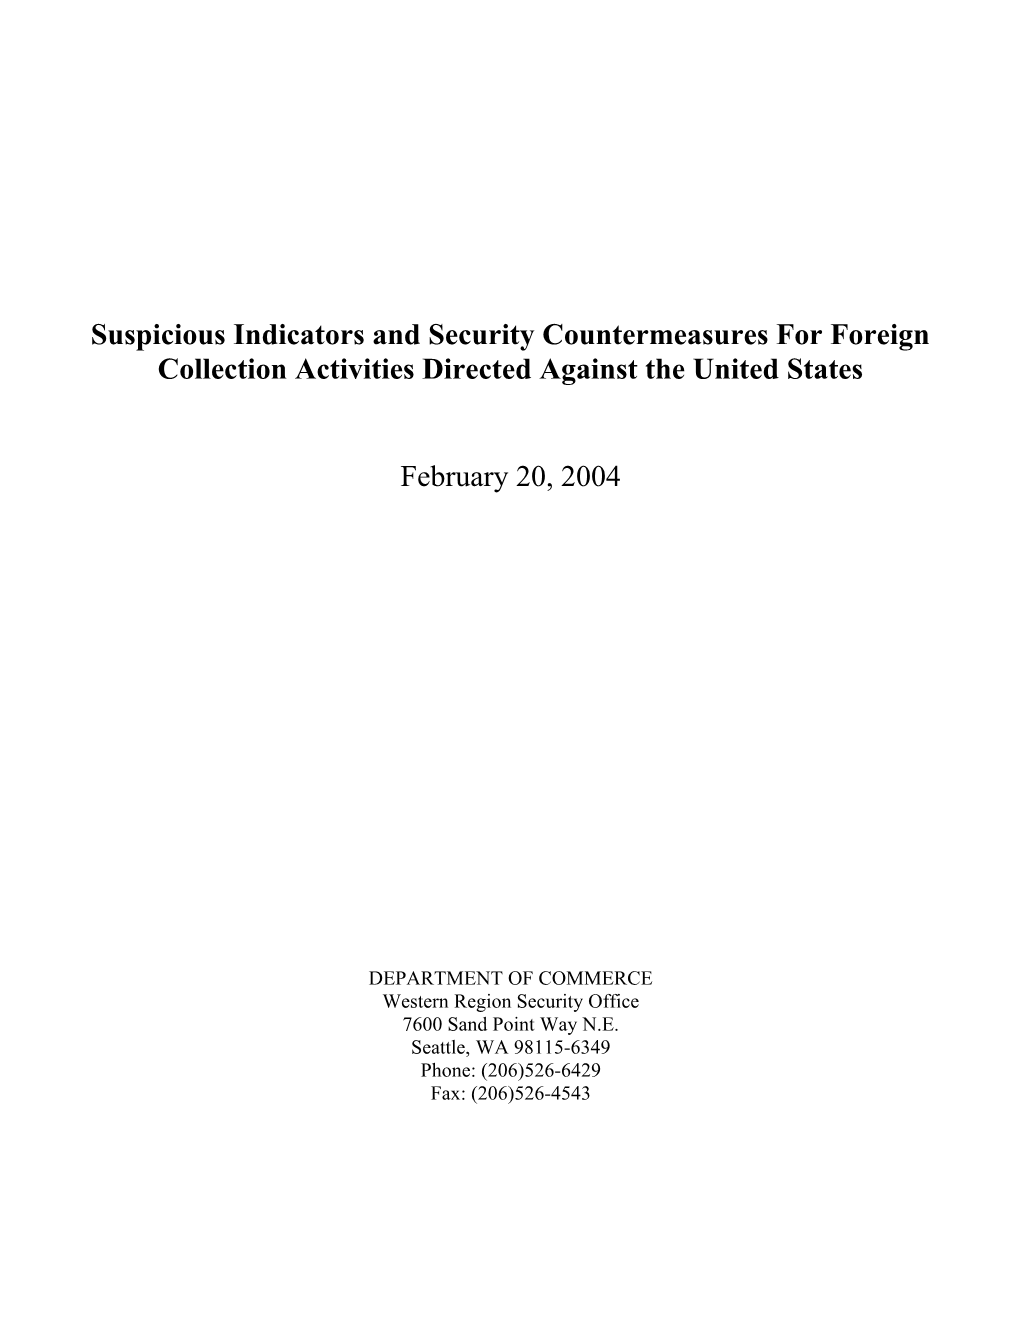 Suspicious Indicators and Security Countermeasures for Foreign Collection Activities Directed